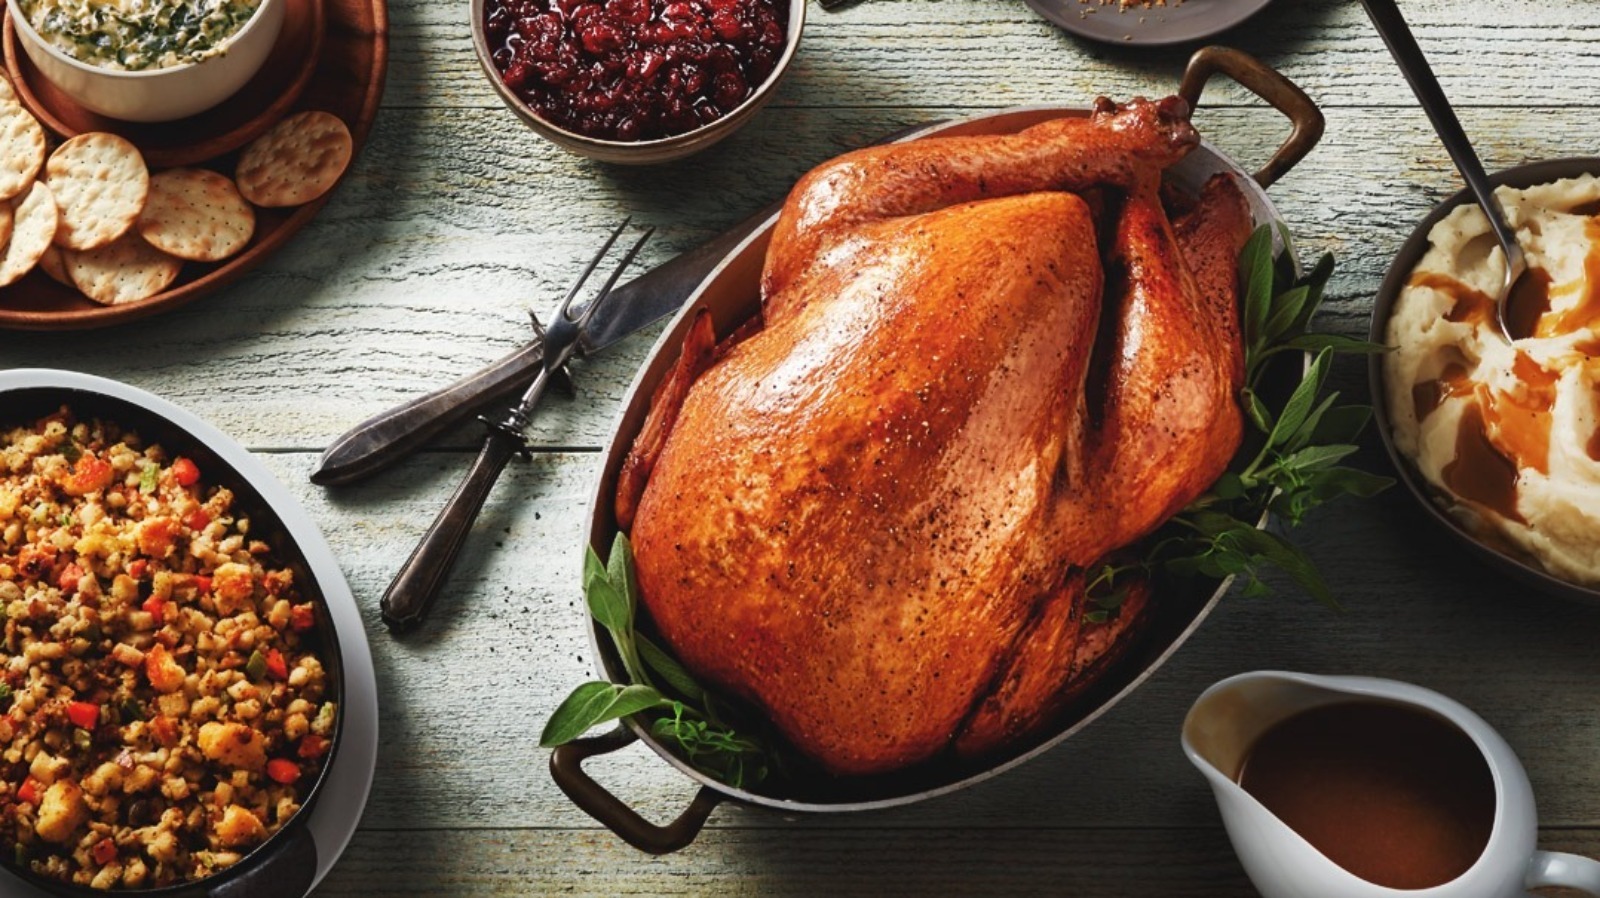 What To Order At Boston Market For Thanksgiving